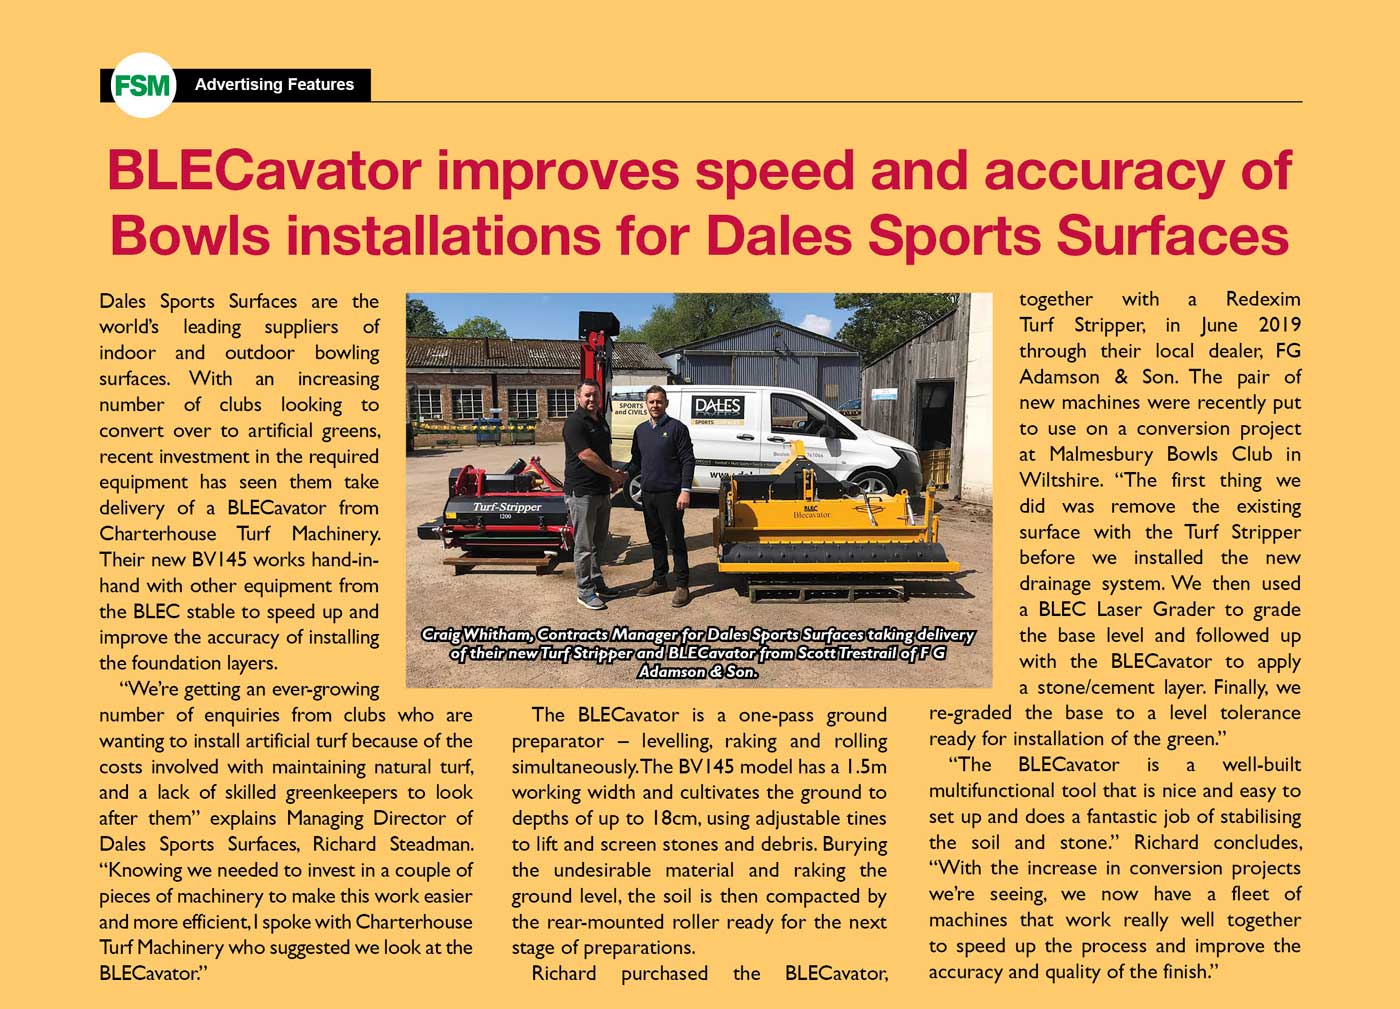 BLECavator improves speed and accuracy of Bowls installations for Dales Sports Surfaces